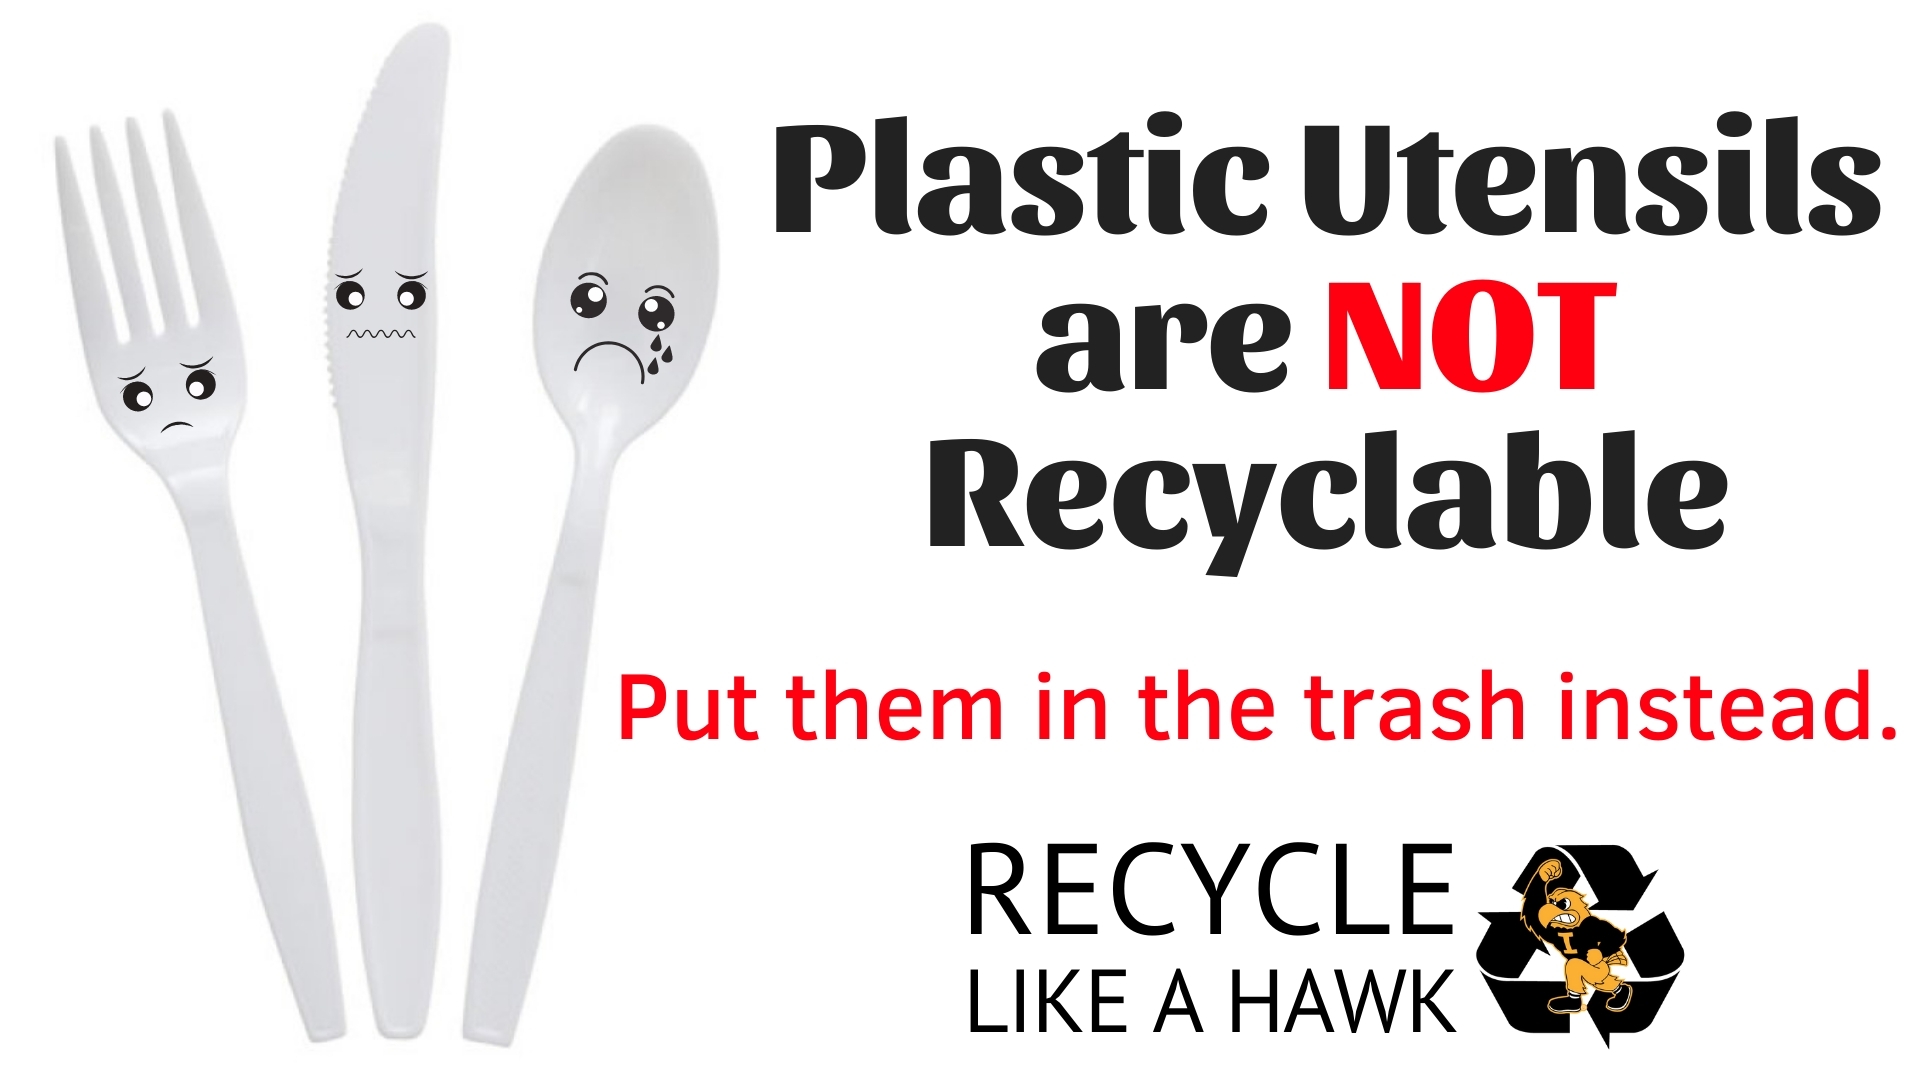 Plastic utensils are not recyclable put them in the trash instead 